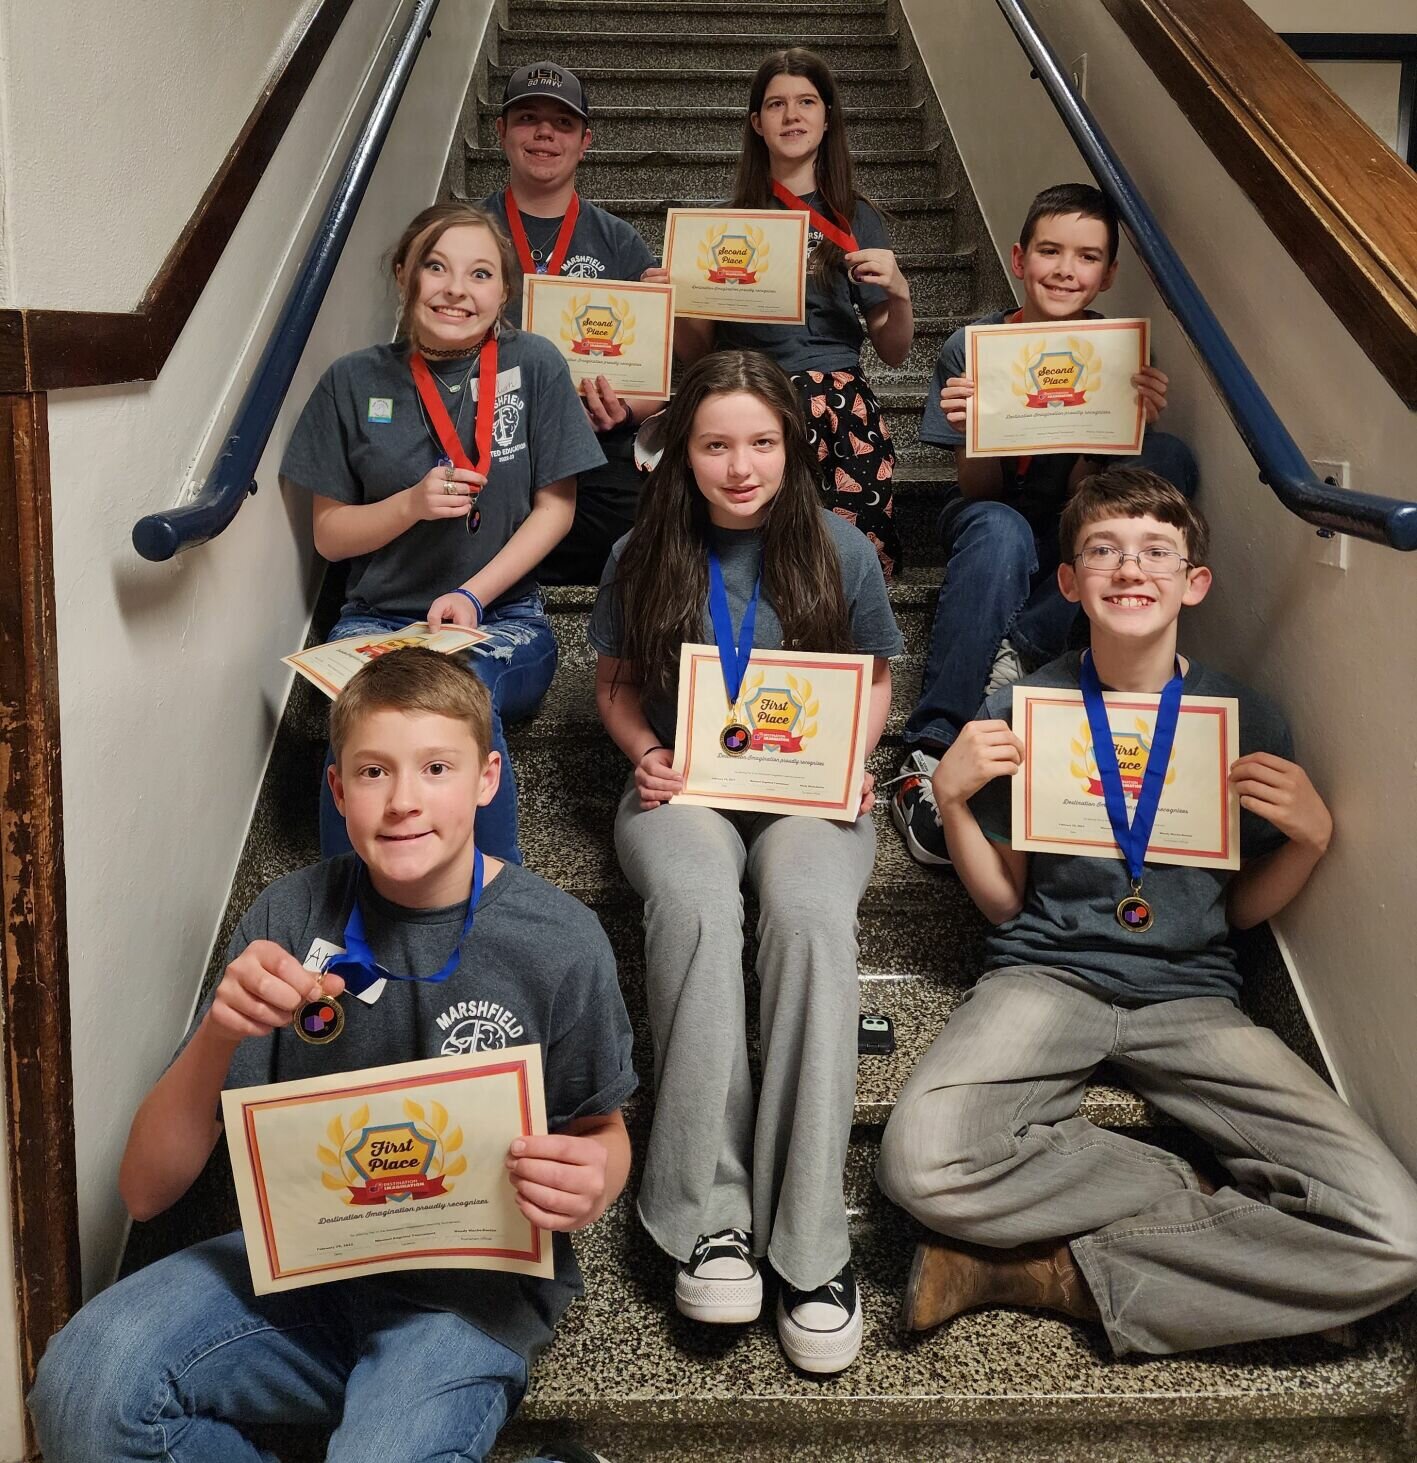 Both teams are pictured after winning first and second place in their respective division in the West Platte, MO, Regional Competition on Feb. 25.